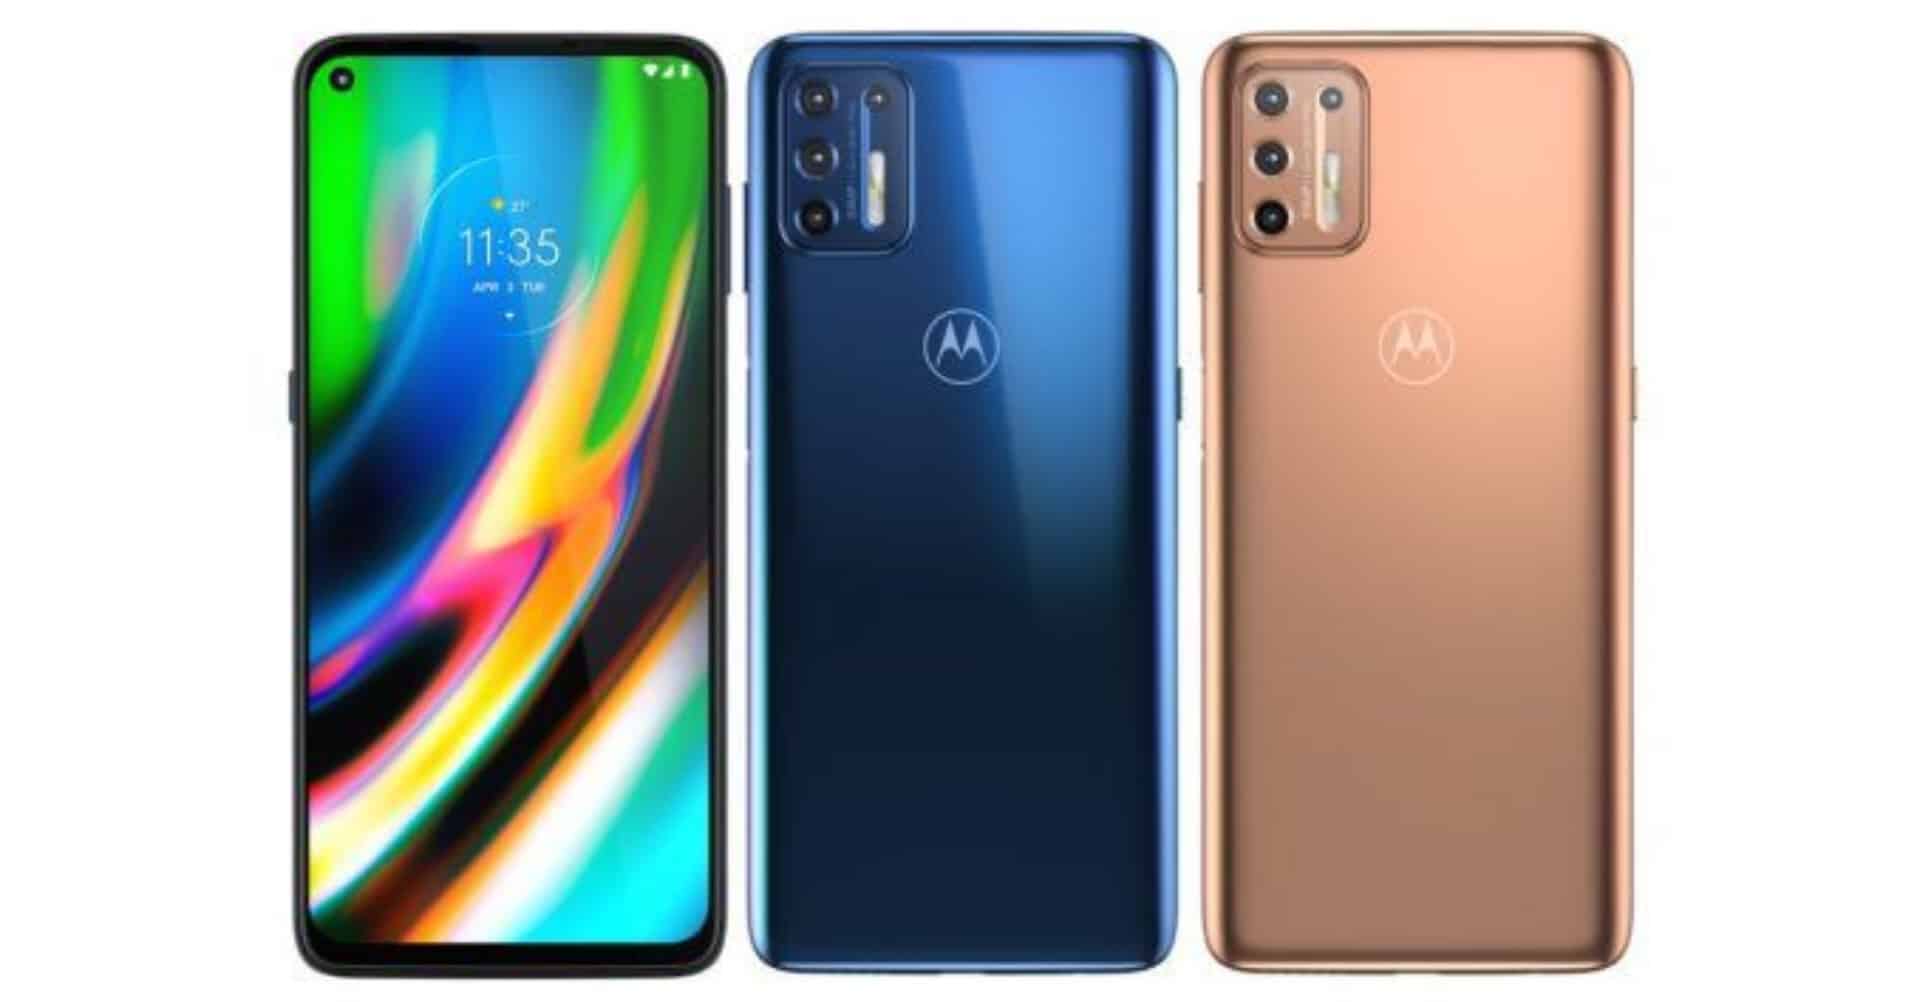 Motorola Moto G9 Plus Spotted on BIS Certification Site, Phone Could Launch Soon in India